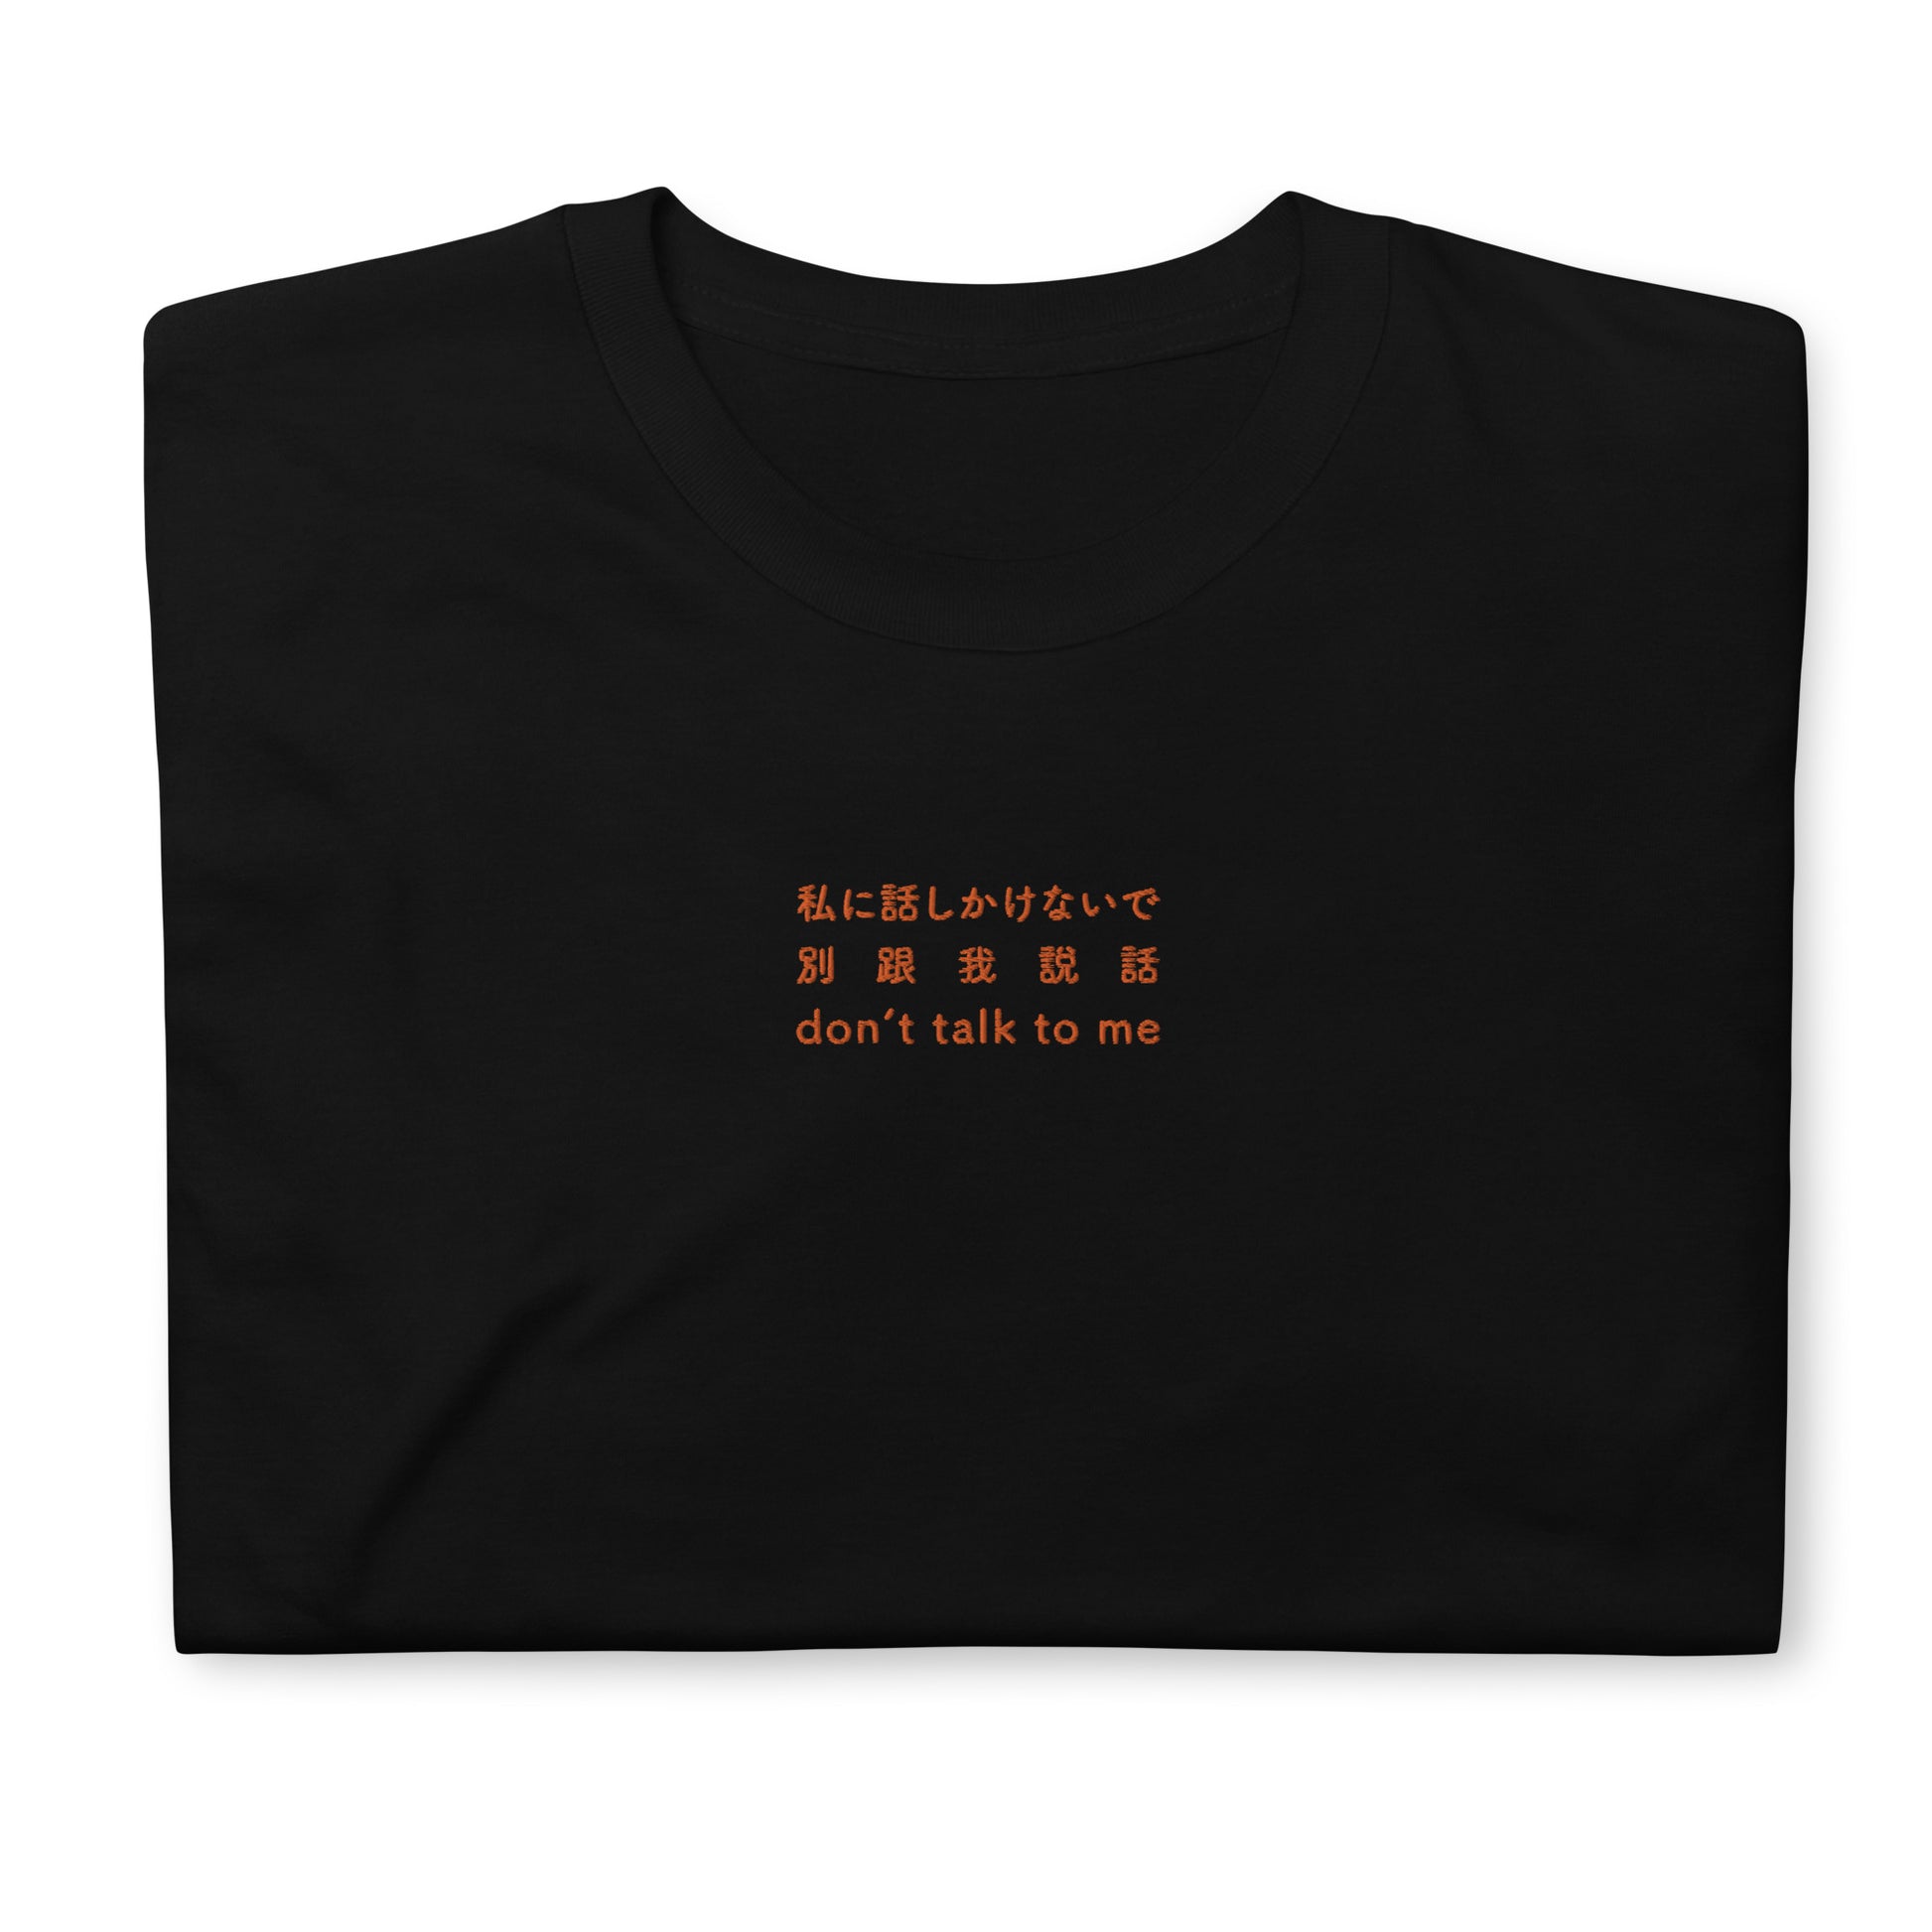 Black High Quality Tee - Front Design with an Orange Embroidery "don't talk to me" in Japanese,Chinese and English